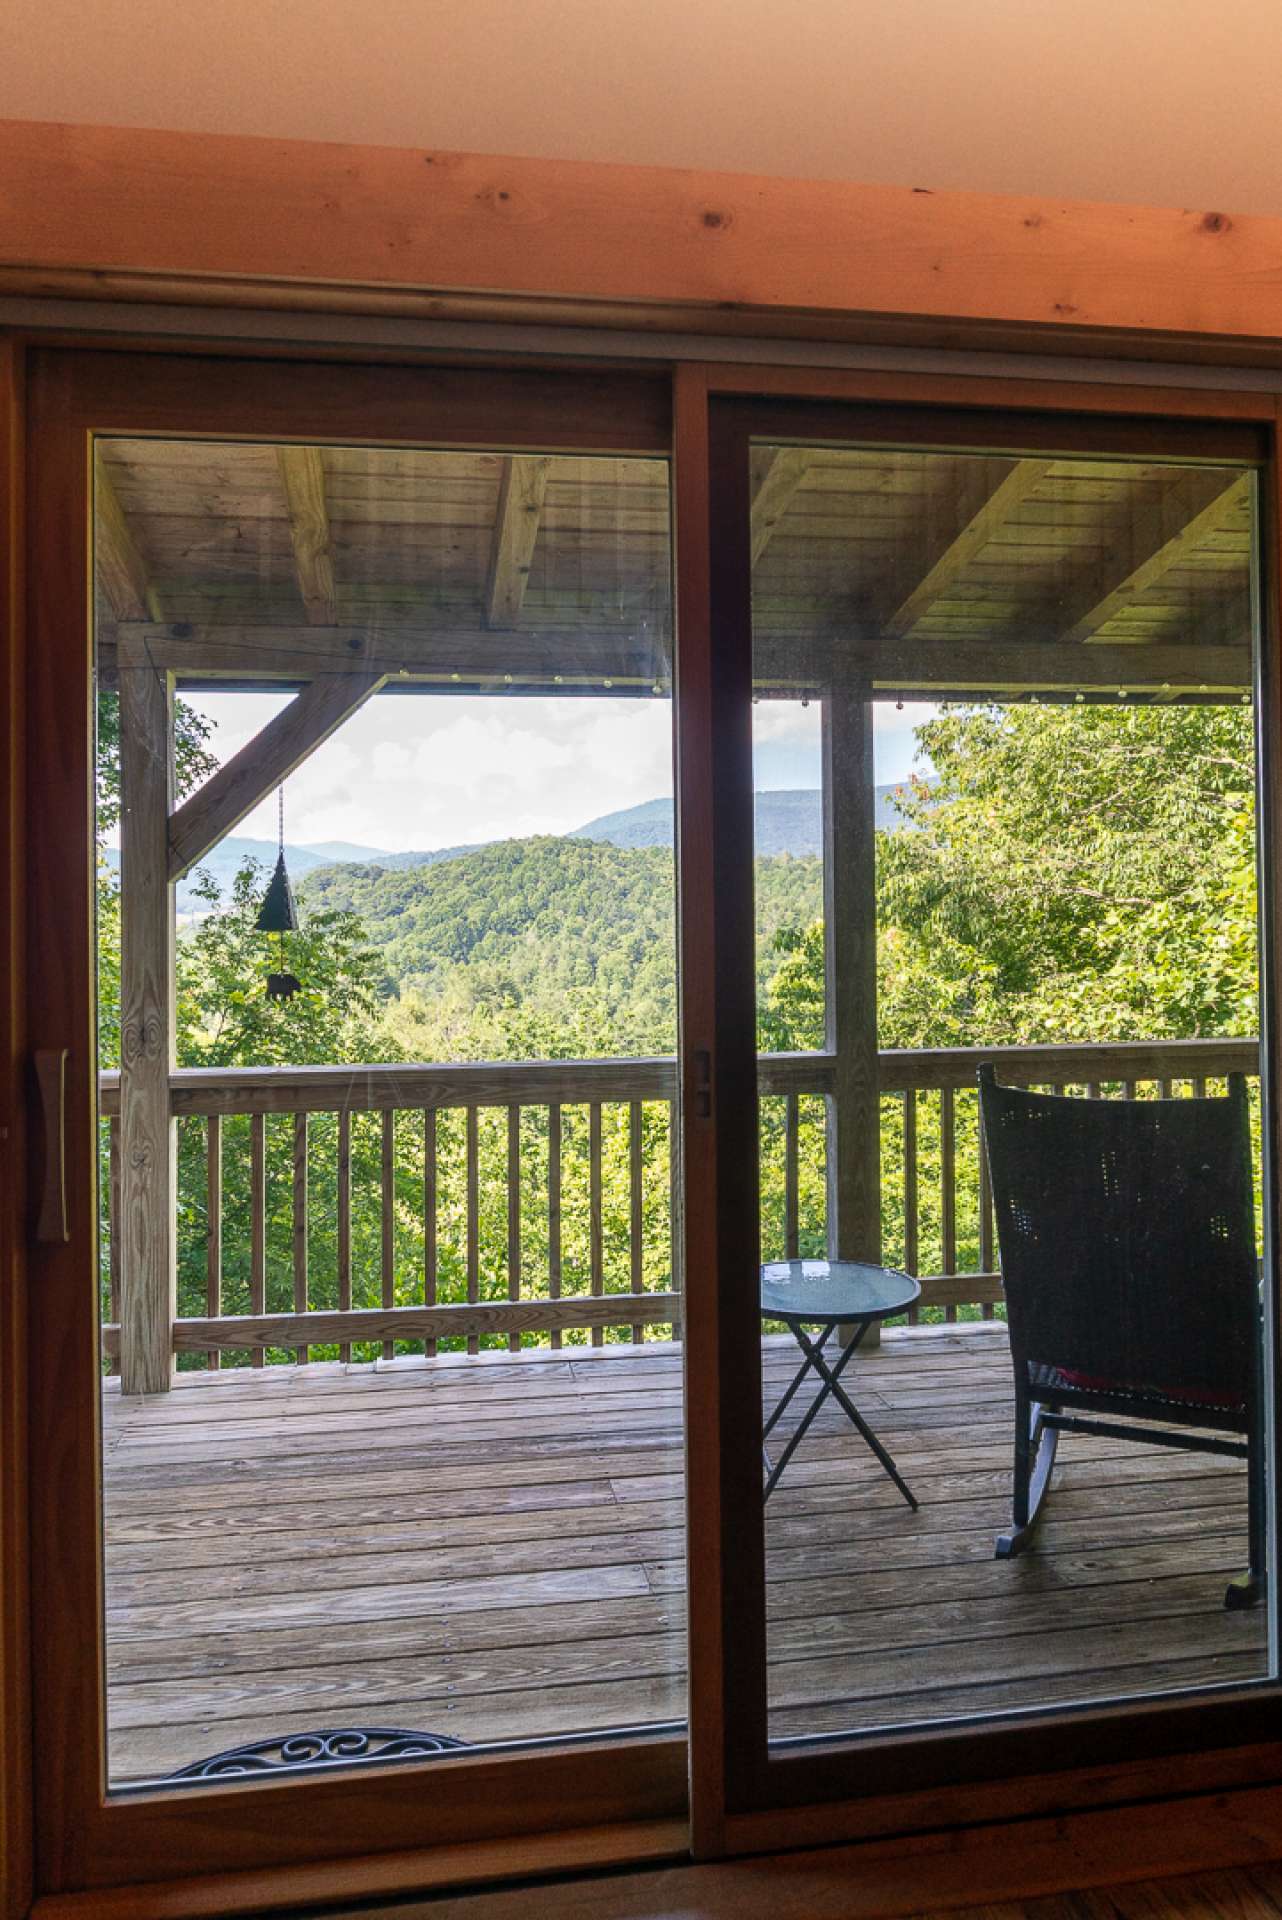 The living area also offers access to the covered deck and allows you to enjoy the views through all four seasons in the Blue Ridge Mountains of North Carolina.